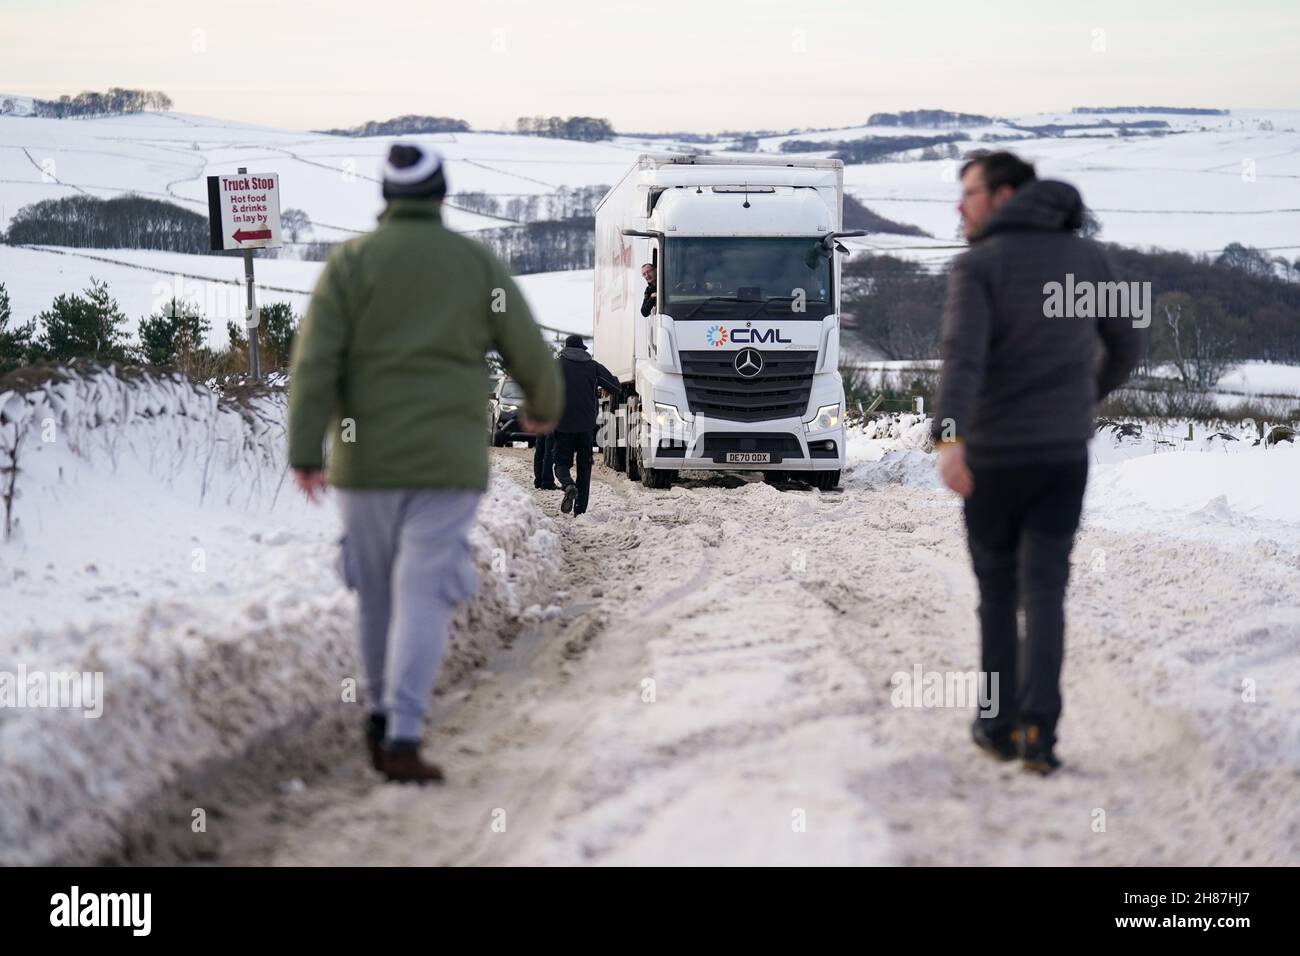 Motorists gather by a stuck HGV along the snow-covered A515 near Biggin, in the Peak District, Derbyshire, amid freezing conditions in the aftermath of Storm Arwen. Picture date: Sunday November 28, 2021. Stock Photo